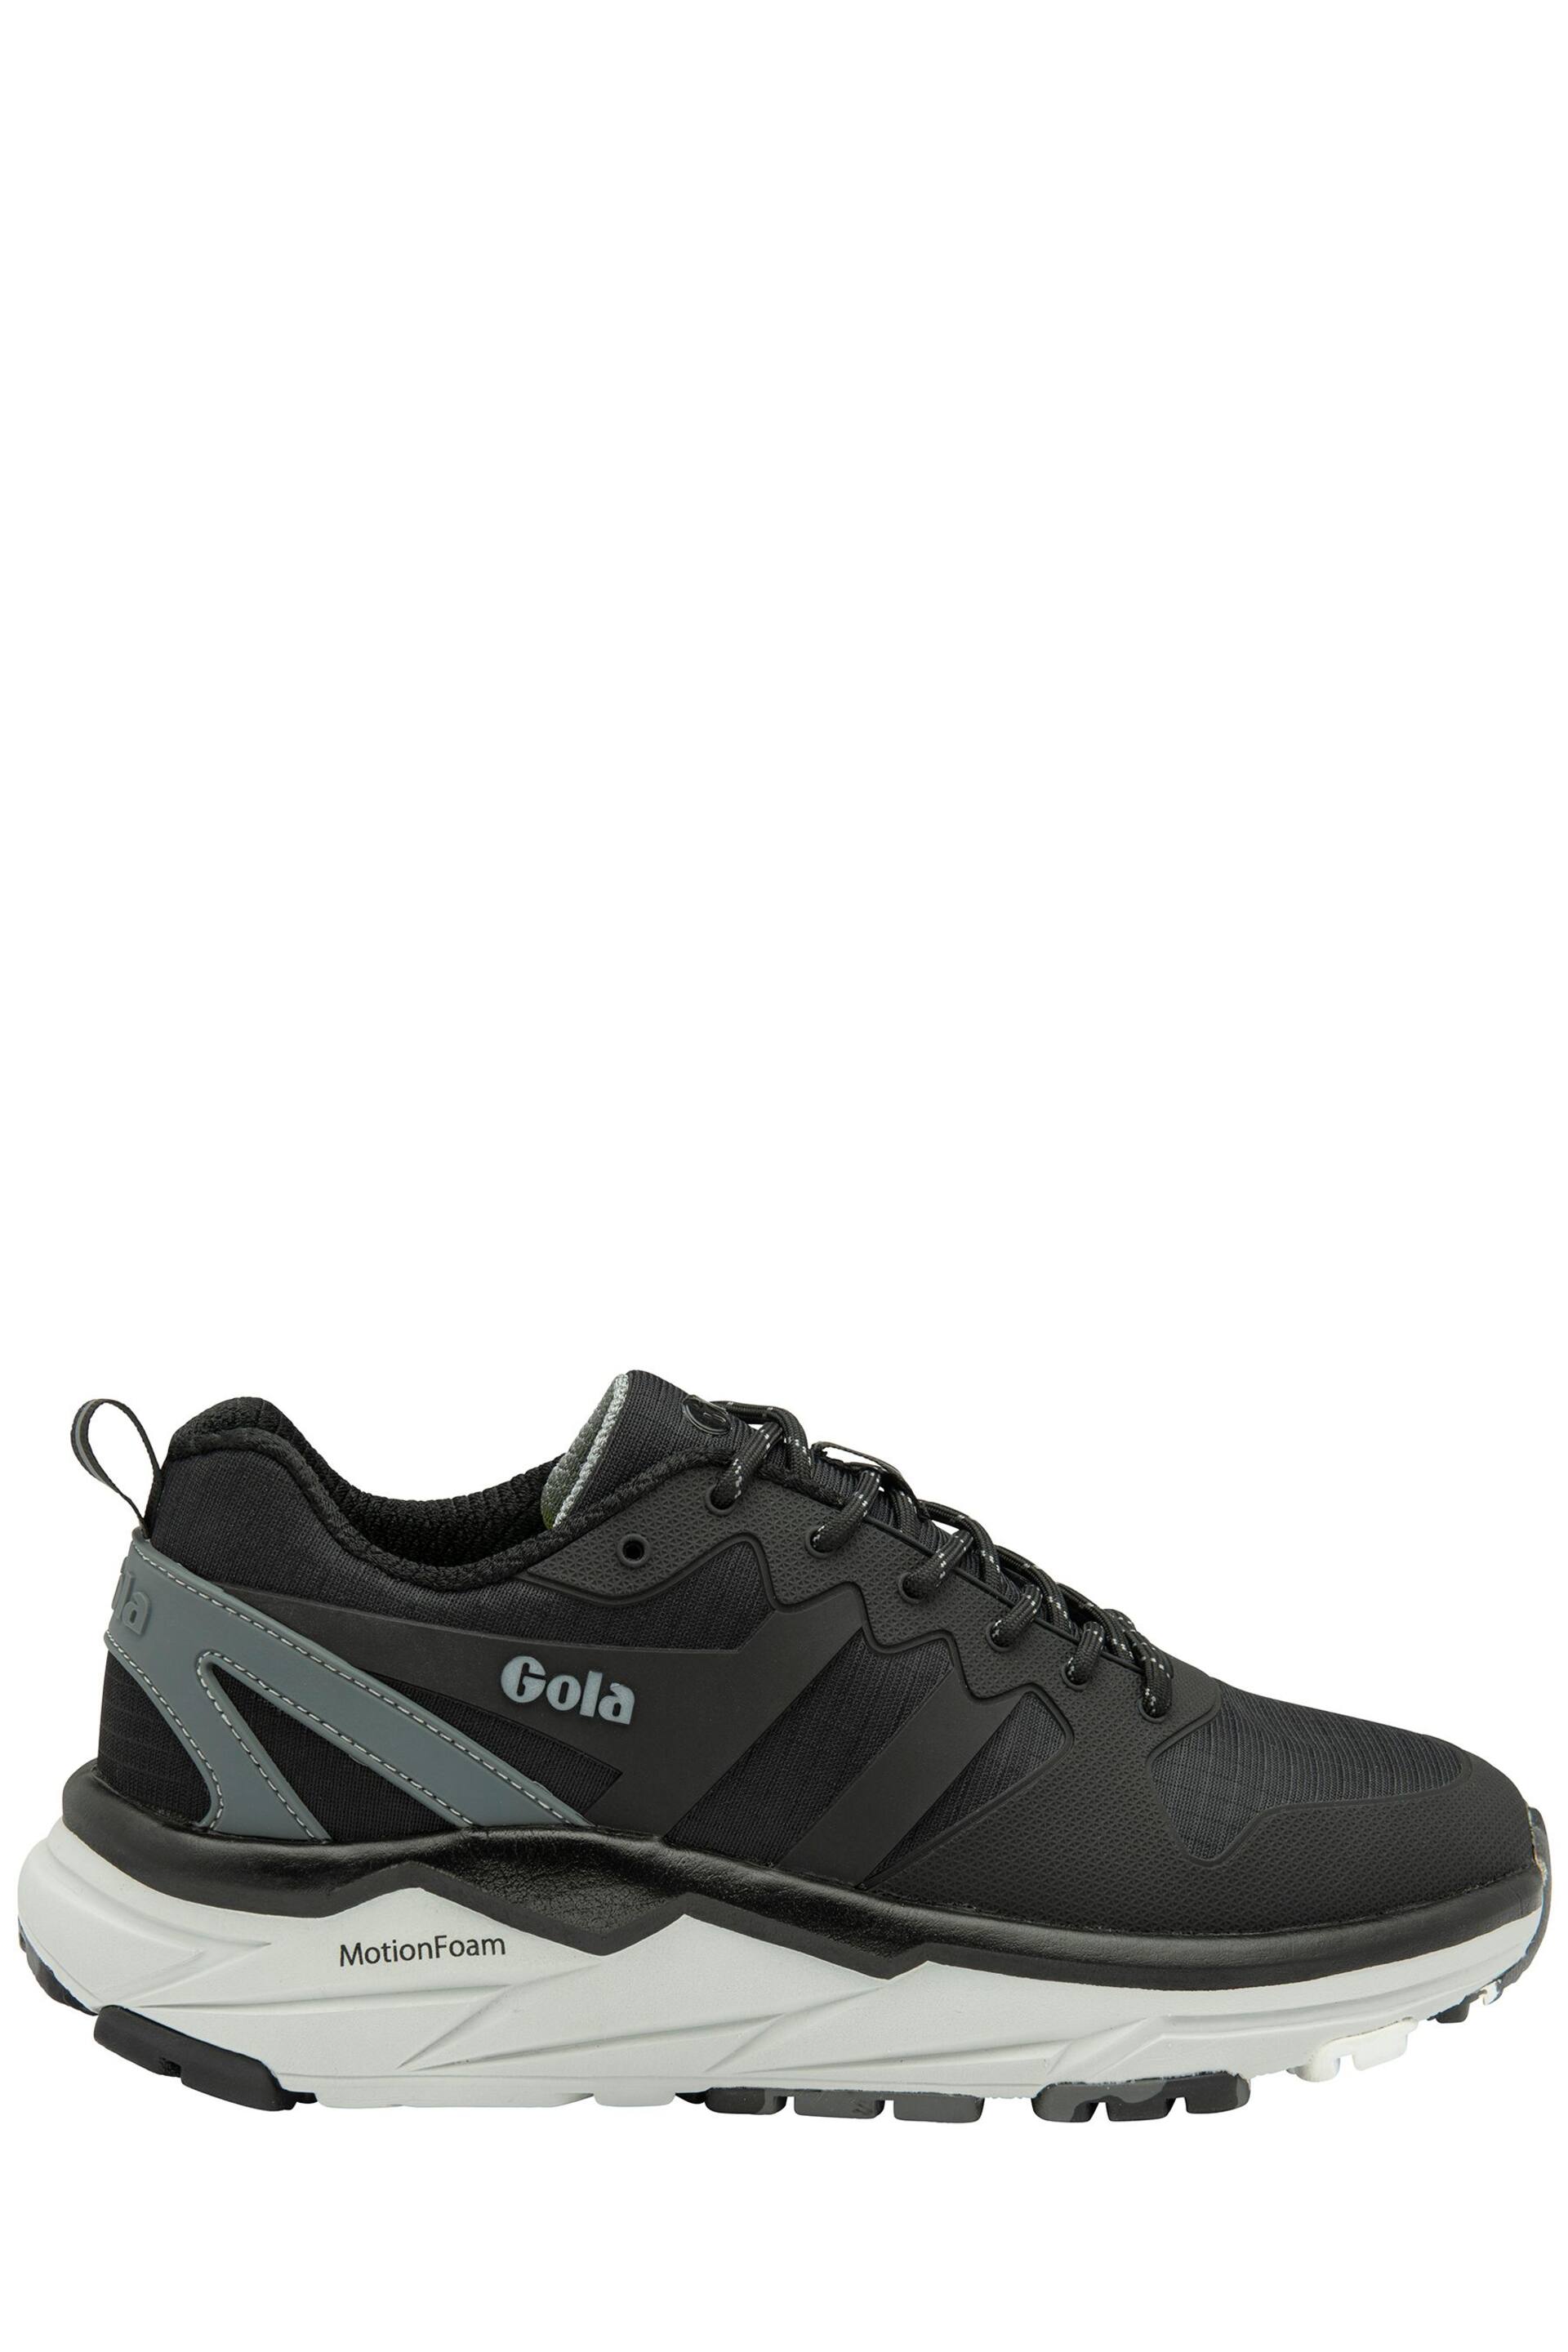 Gola Black Thunder 2 ATR Mesh Lace-Up Mens Running Trainers - Image 1 of 4